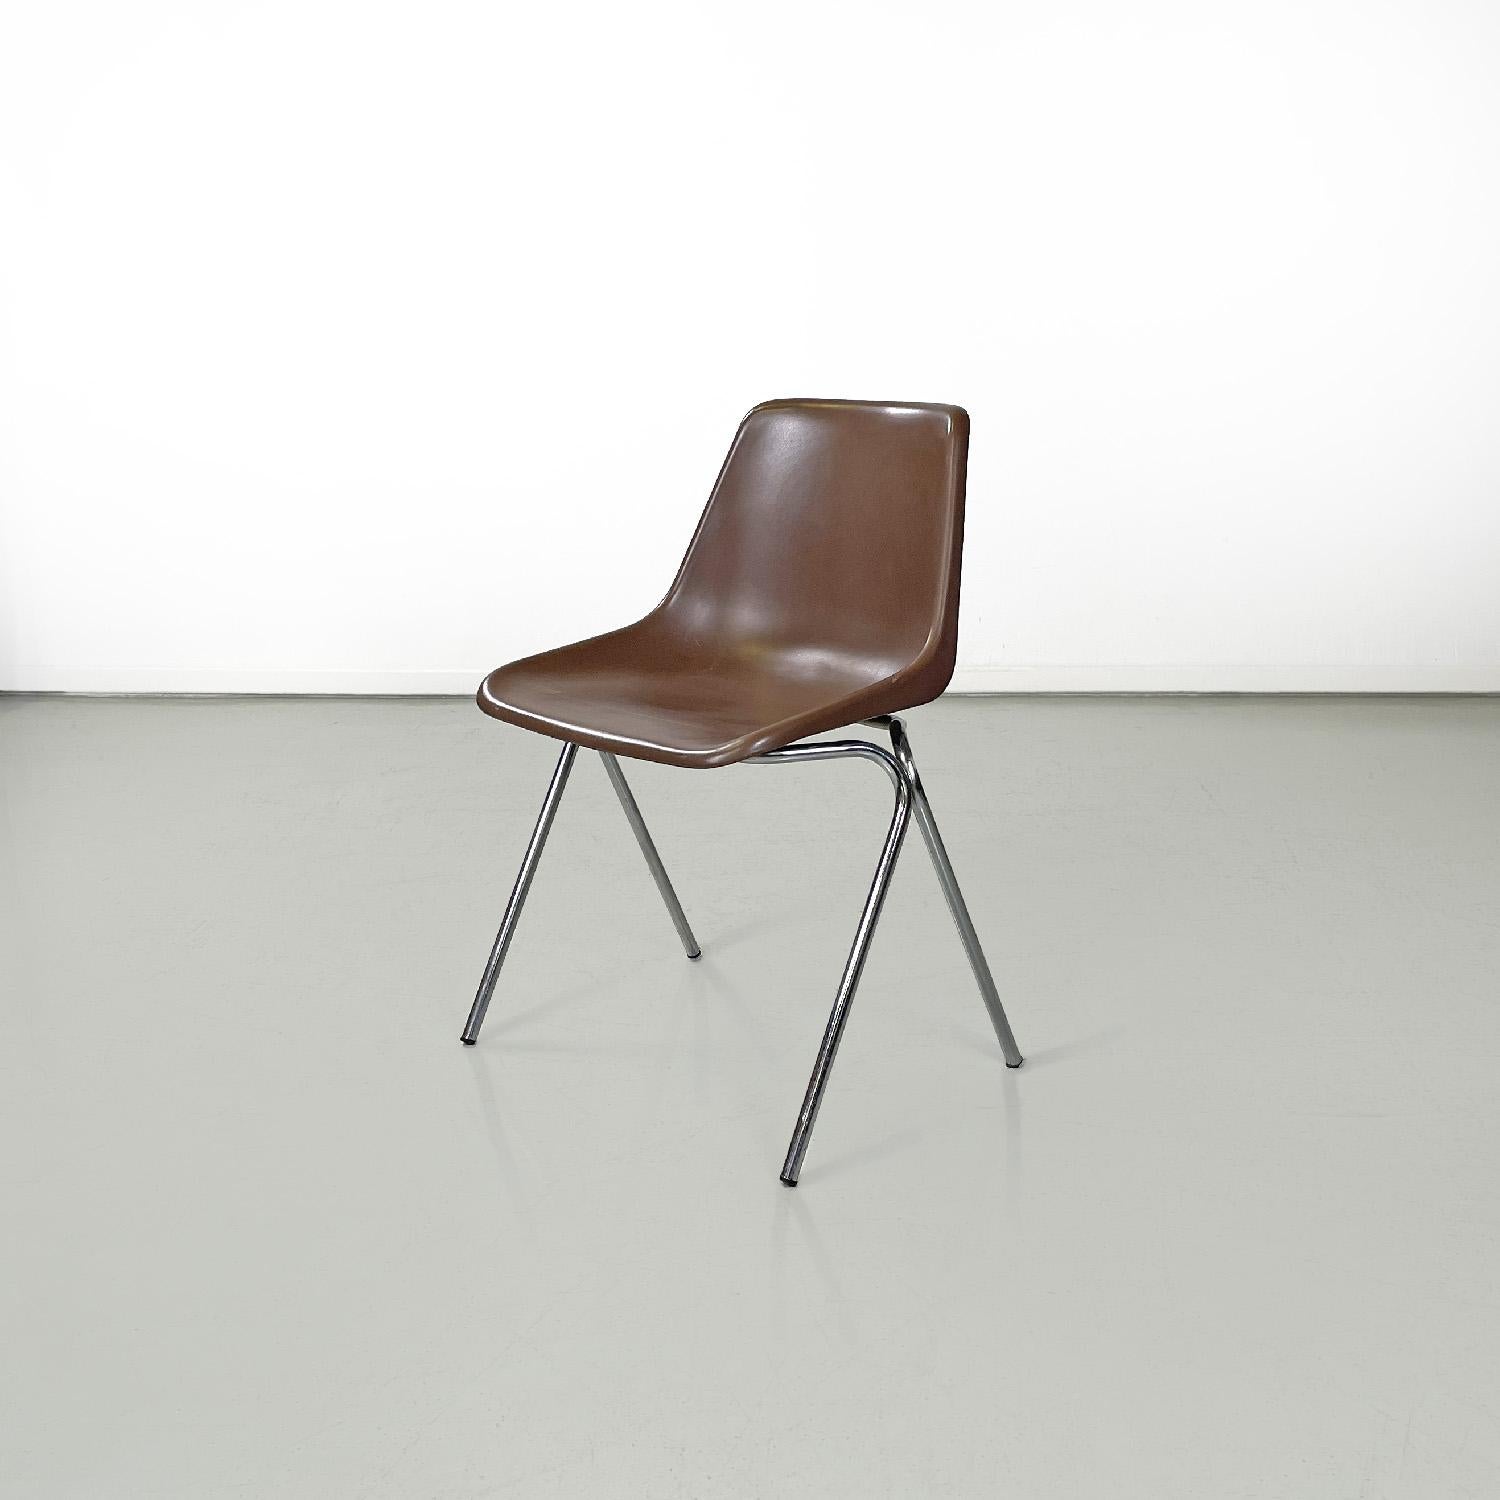 Italian modern stackable chairs by Proinco in brown plastic, 1970s
Set of five chairs with seat and backrest composed of a single brown plastic structure, shaped and curved on the seat and on the perimeter. The legs are made of silver-colored